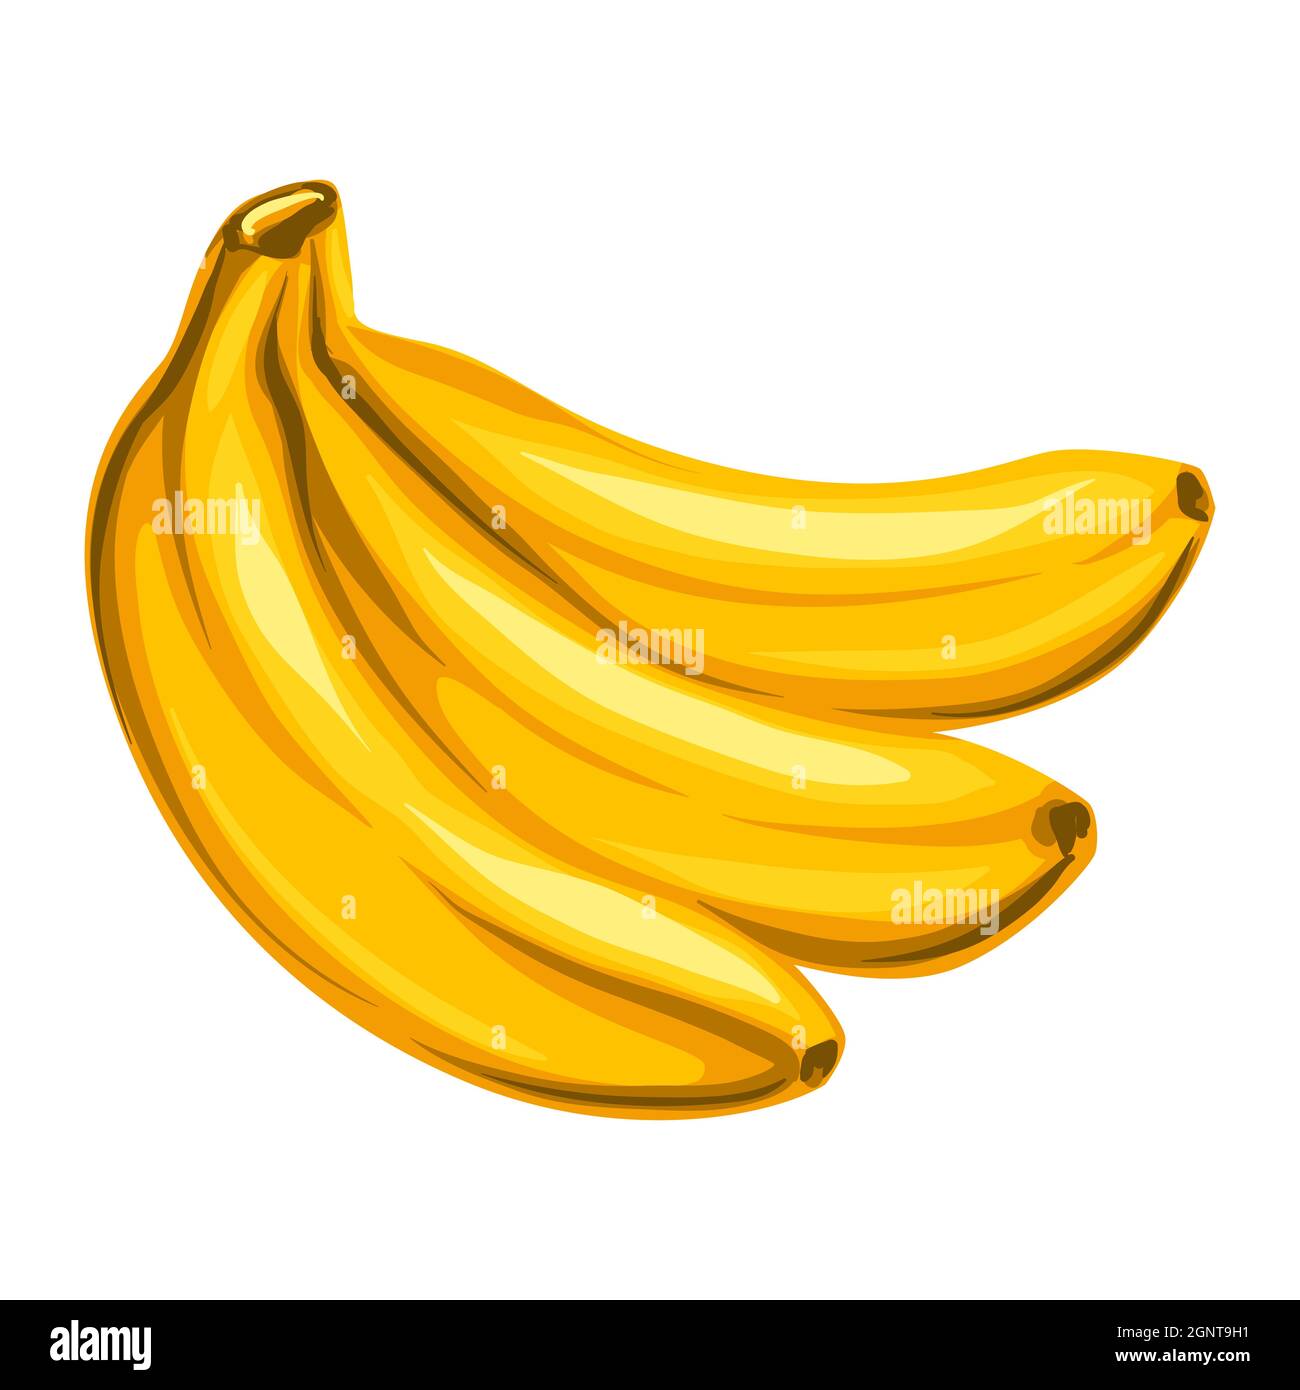 Stylized illustration of bananas. Image for design or decoration. Stock Vector